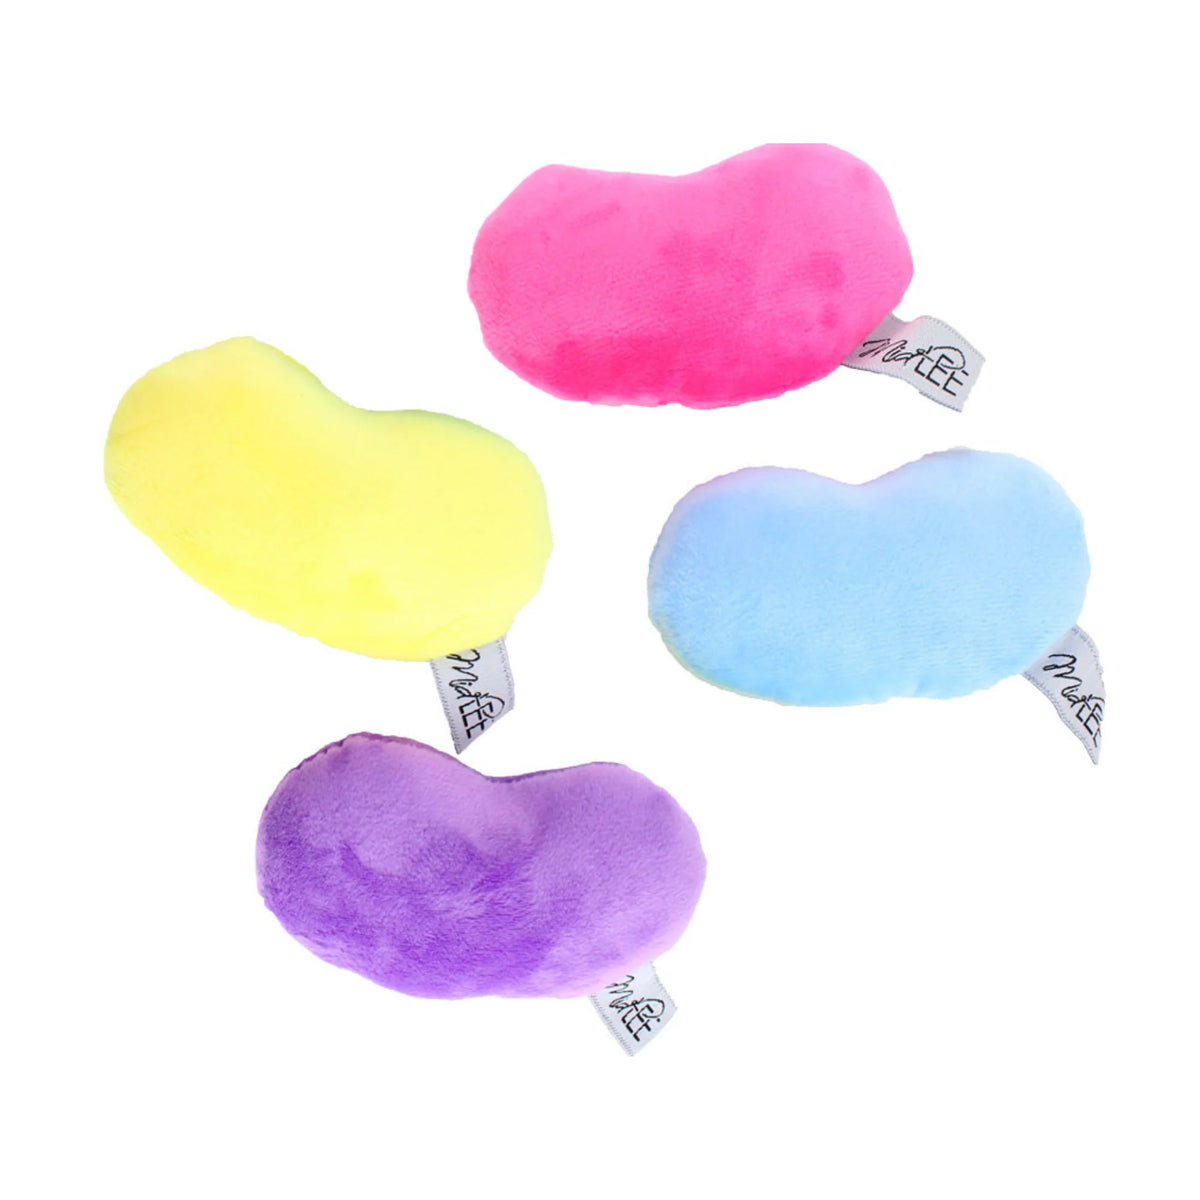 Midlee - Dog Toy Jelly Beans